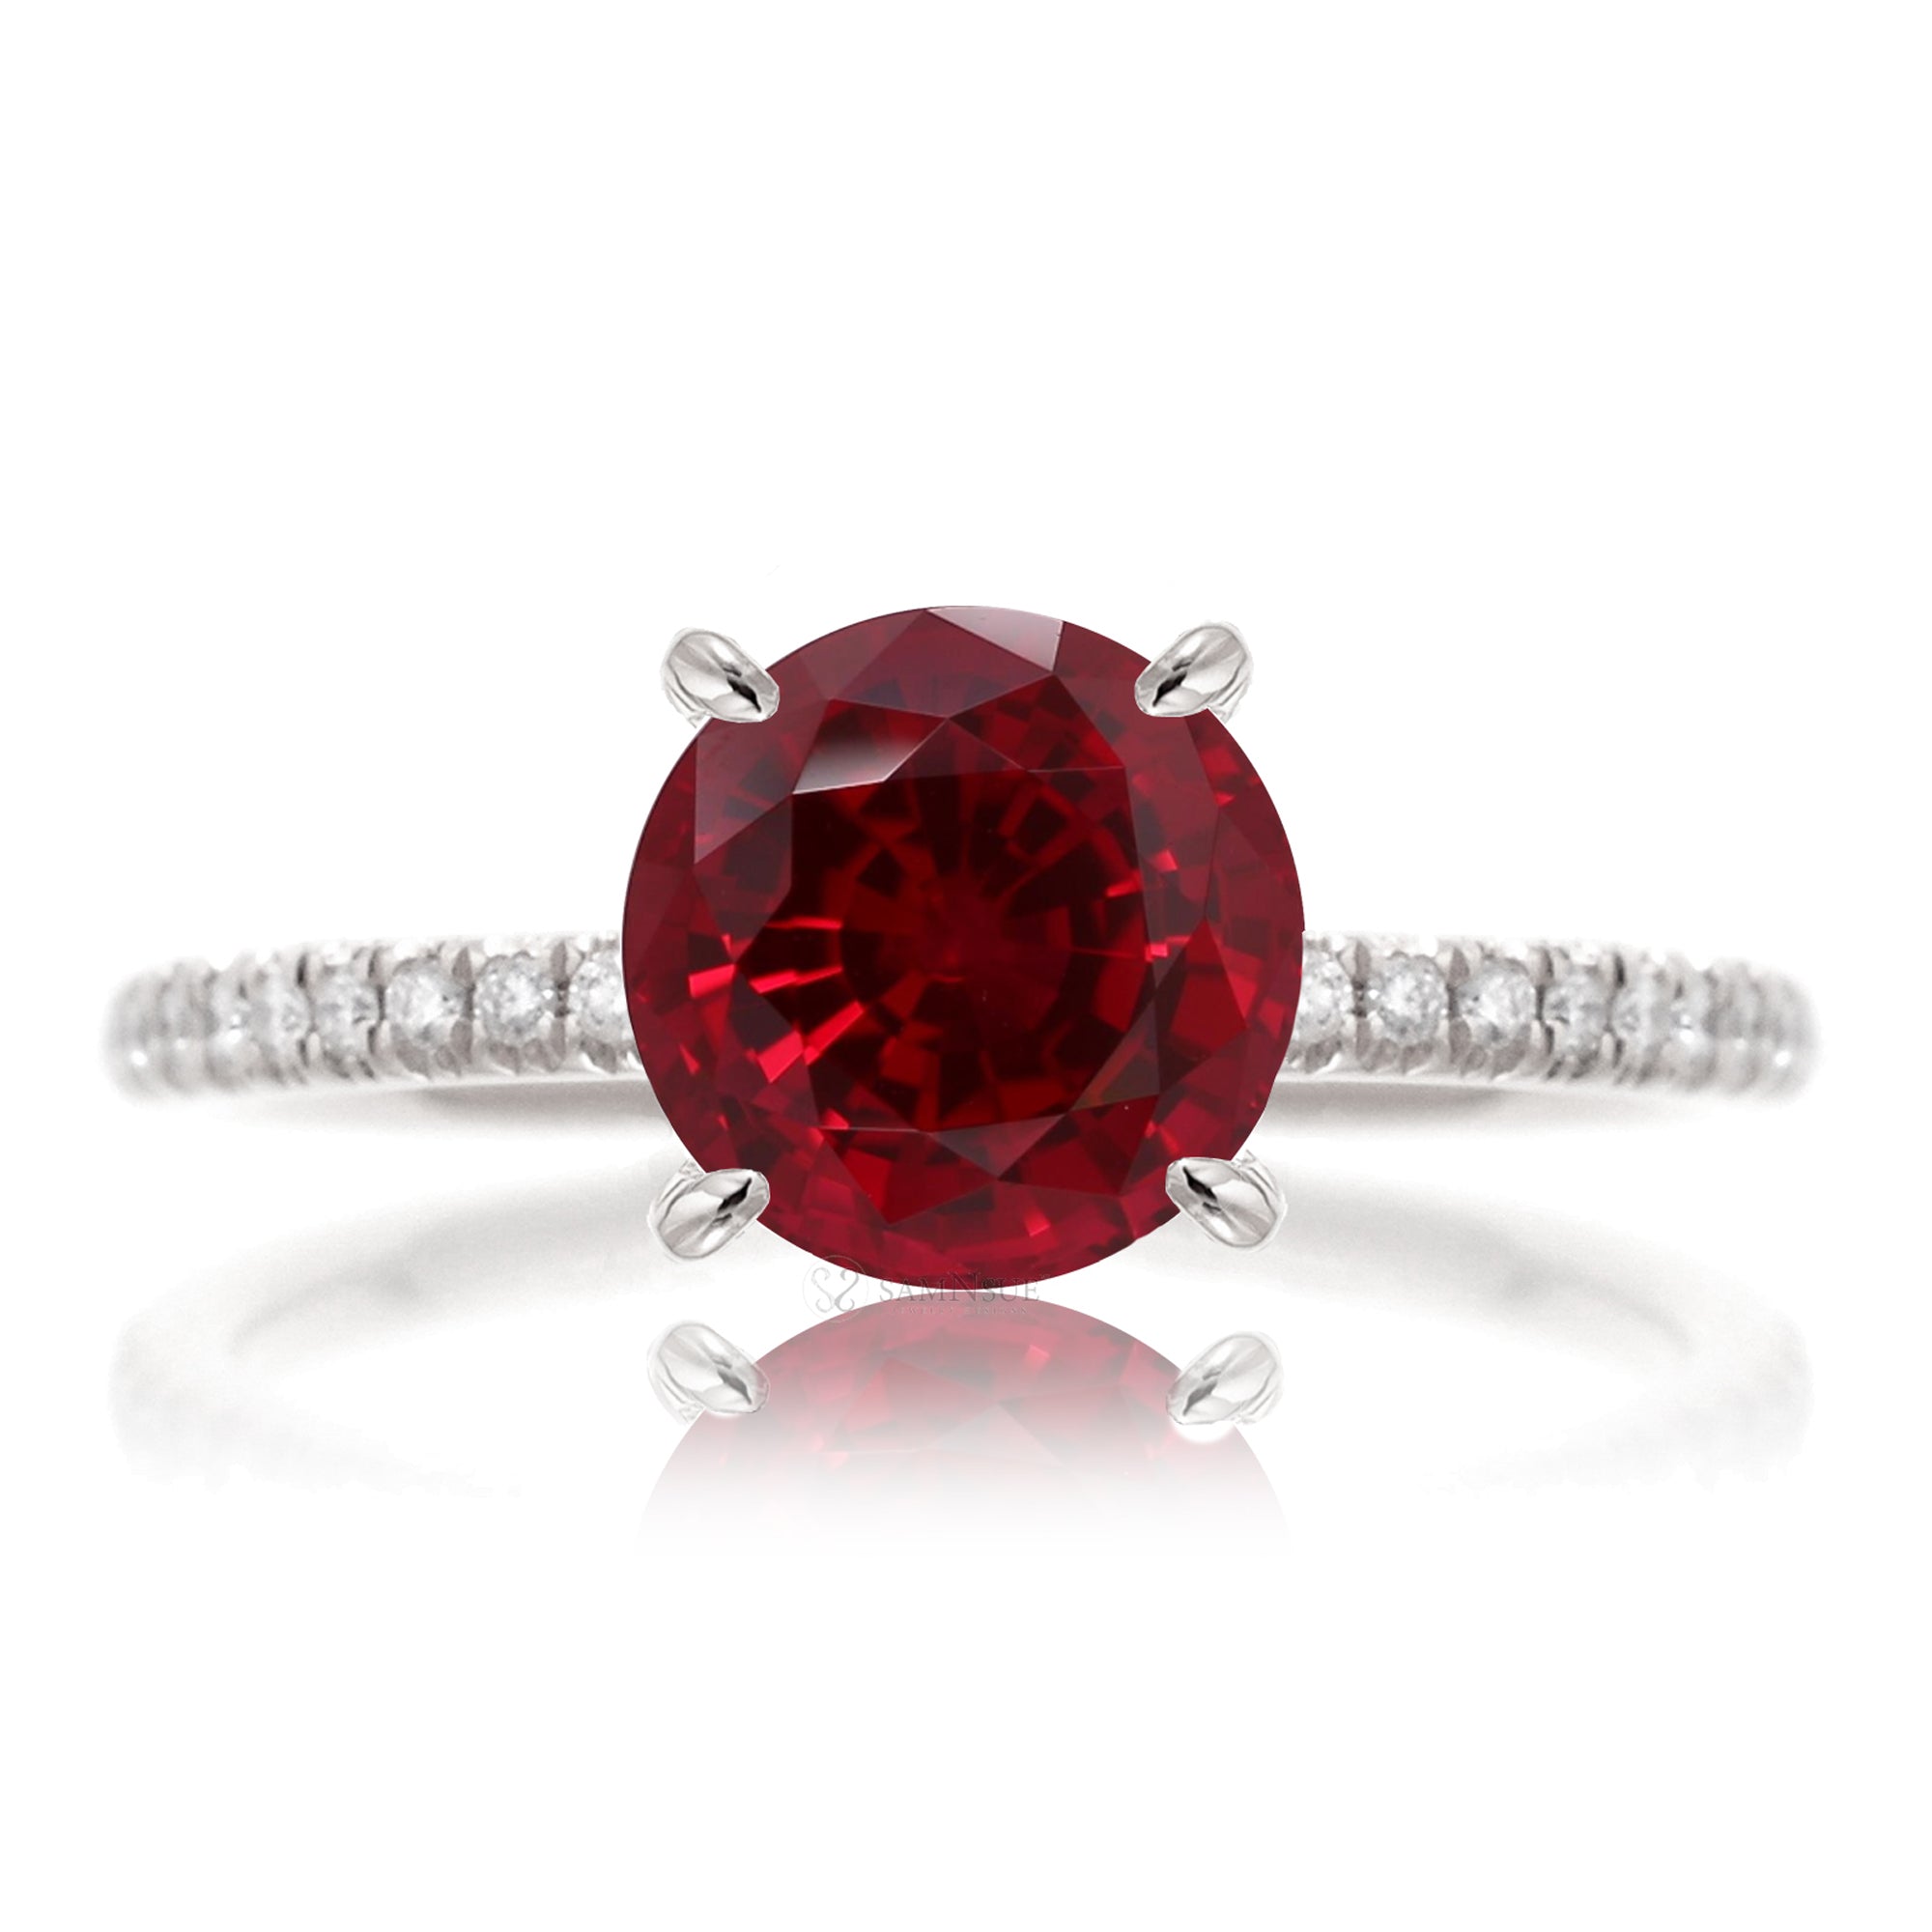 Round cut lab ruby engagement ring diamond band white gold - the Ava